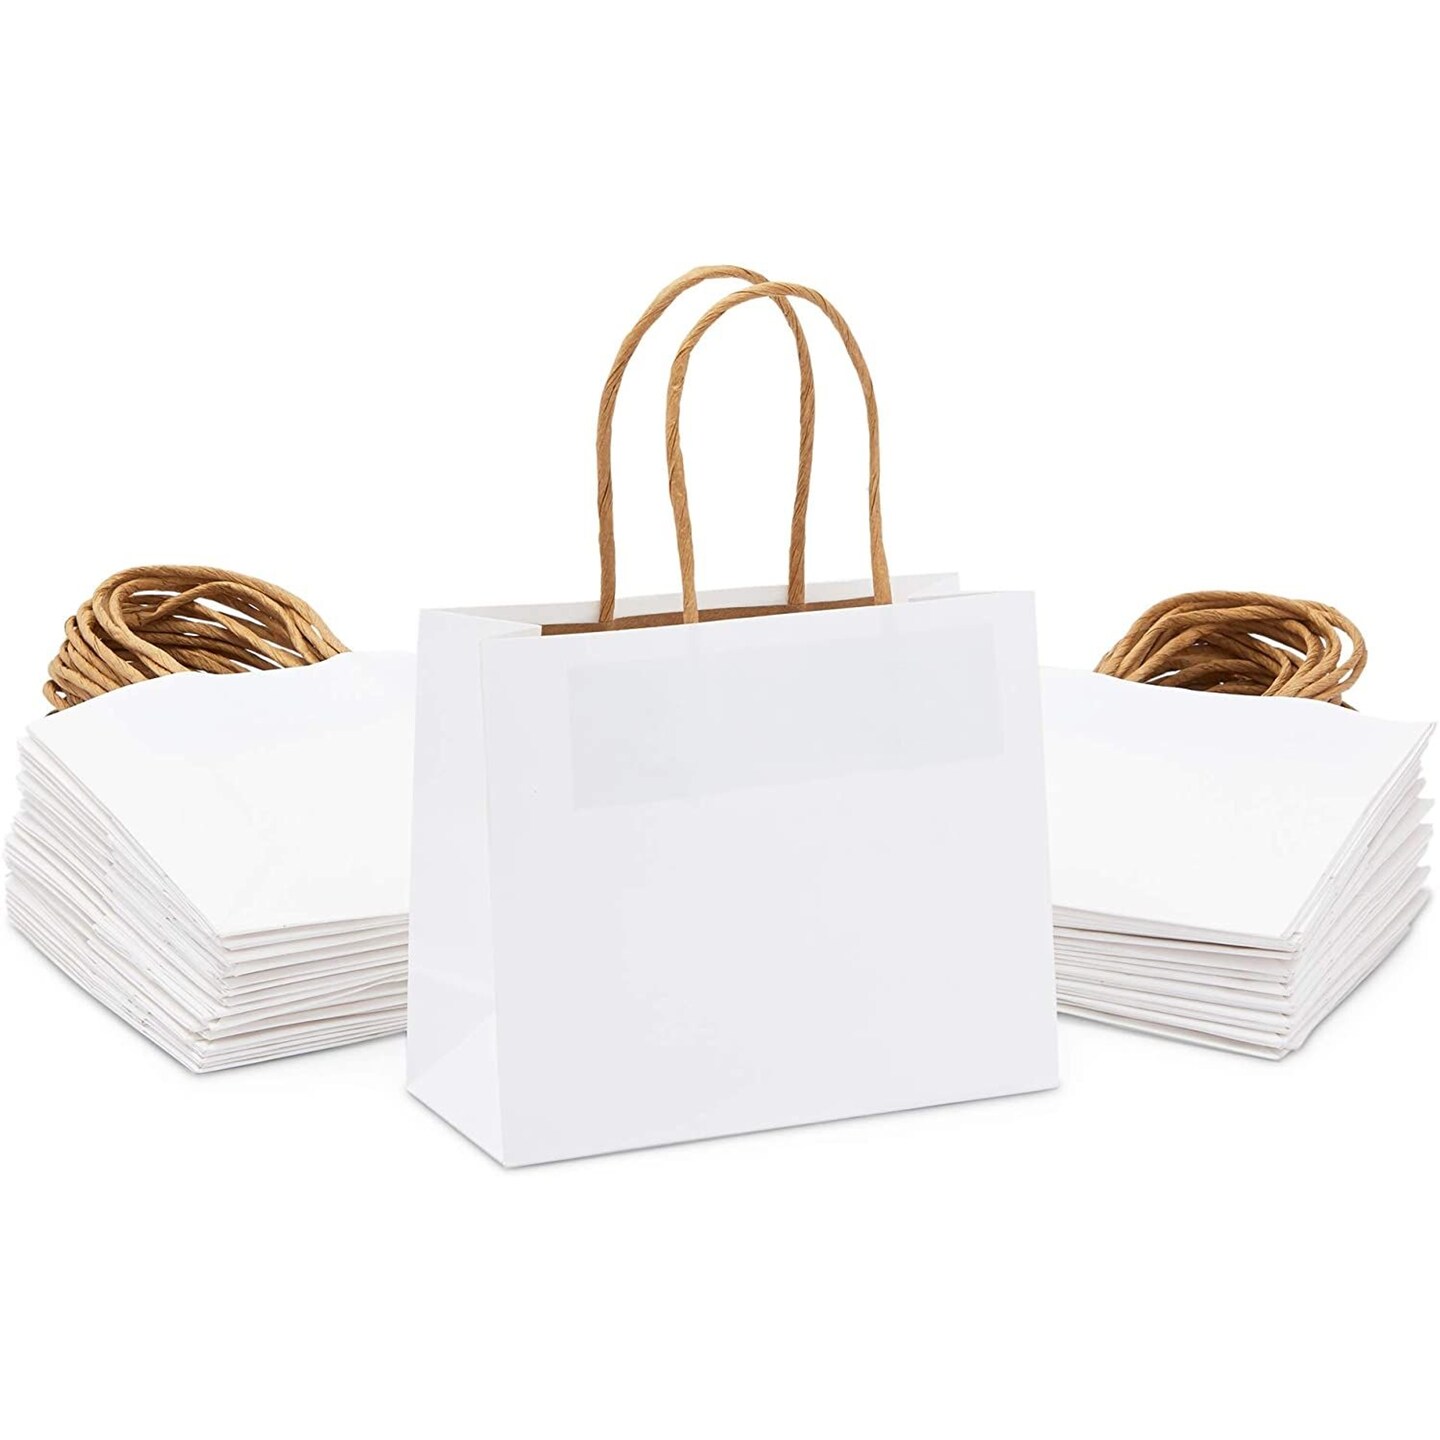 Amazon.com: Bakepacker 32pcs Small Gift Paper Bags with Handles  8.26